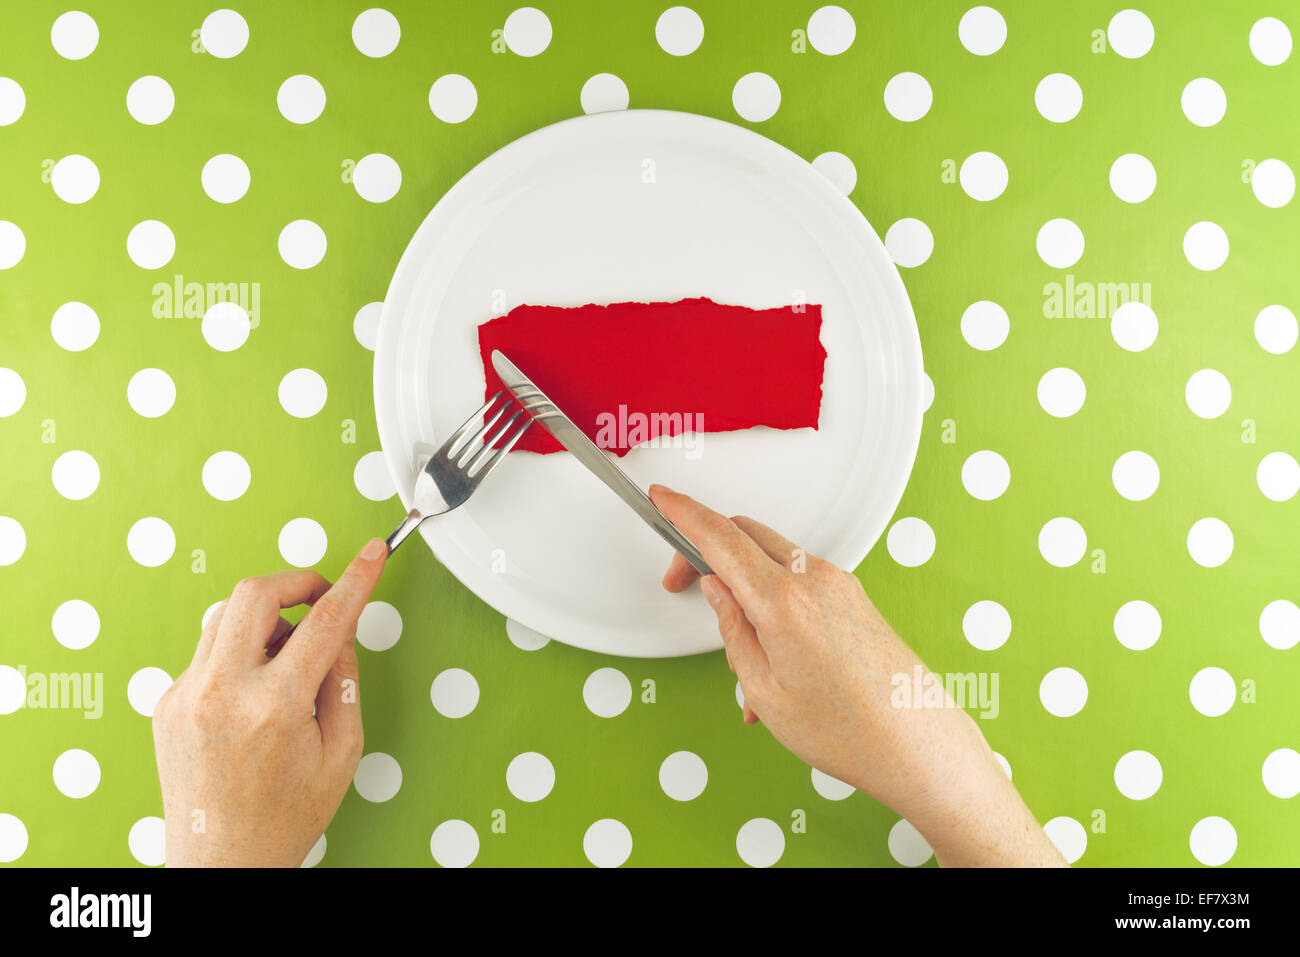 Woman eating from a white plate, top view with red paper as copy space. Stock Photo